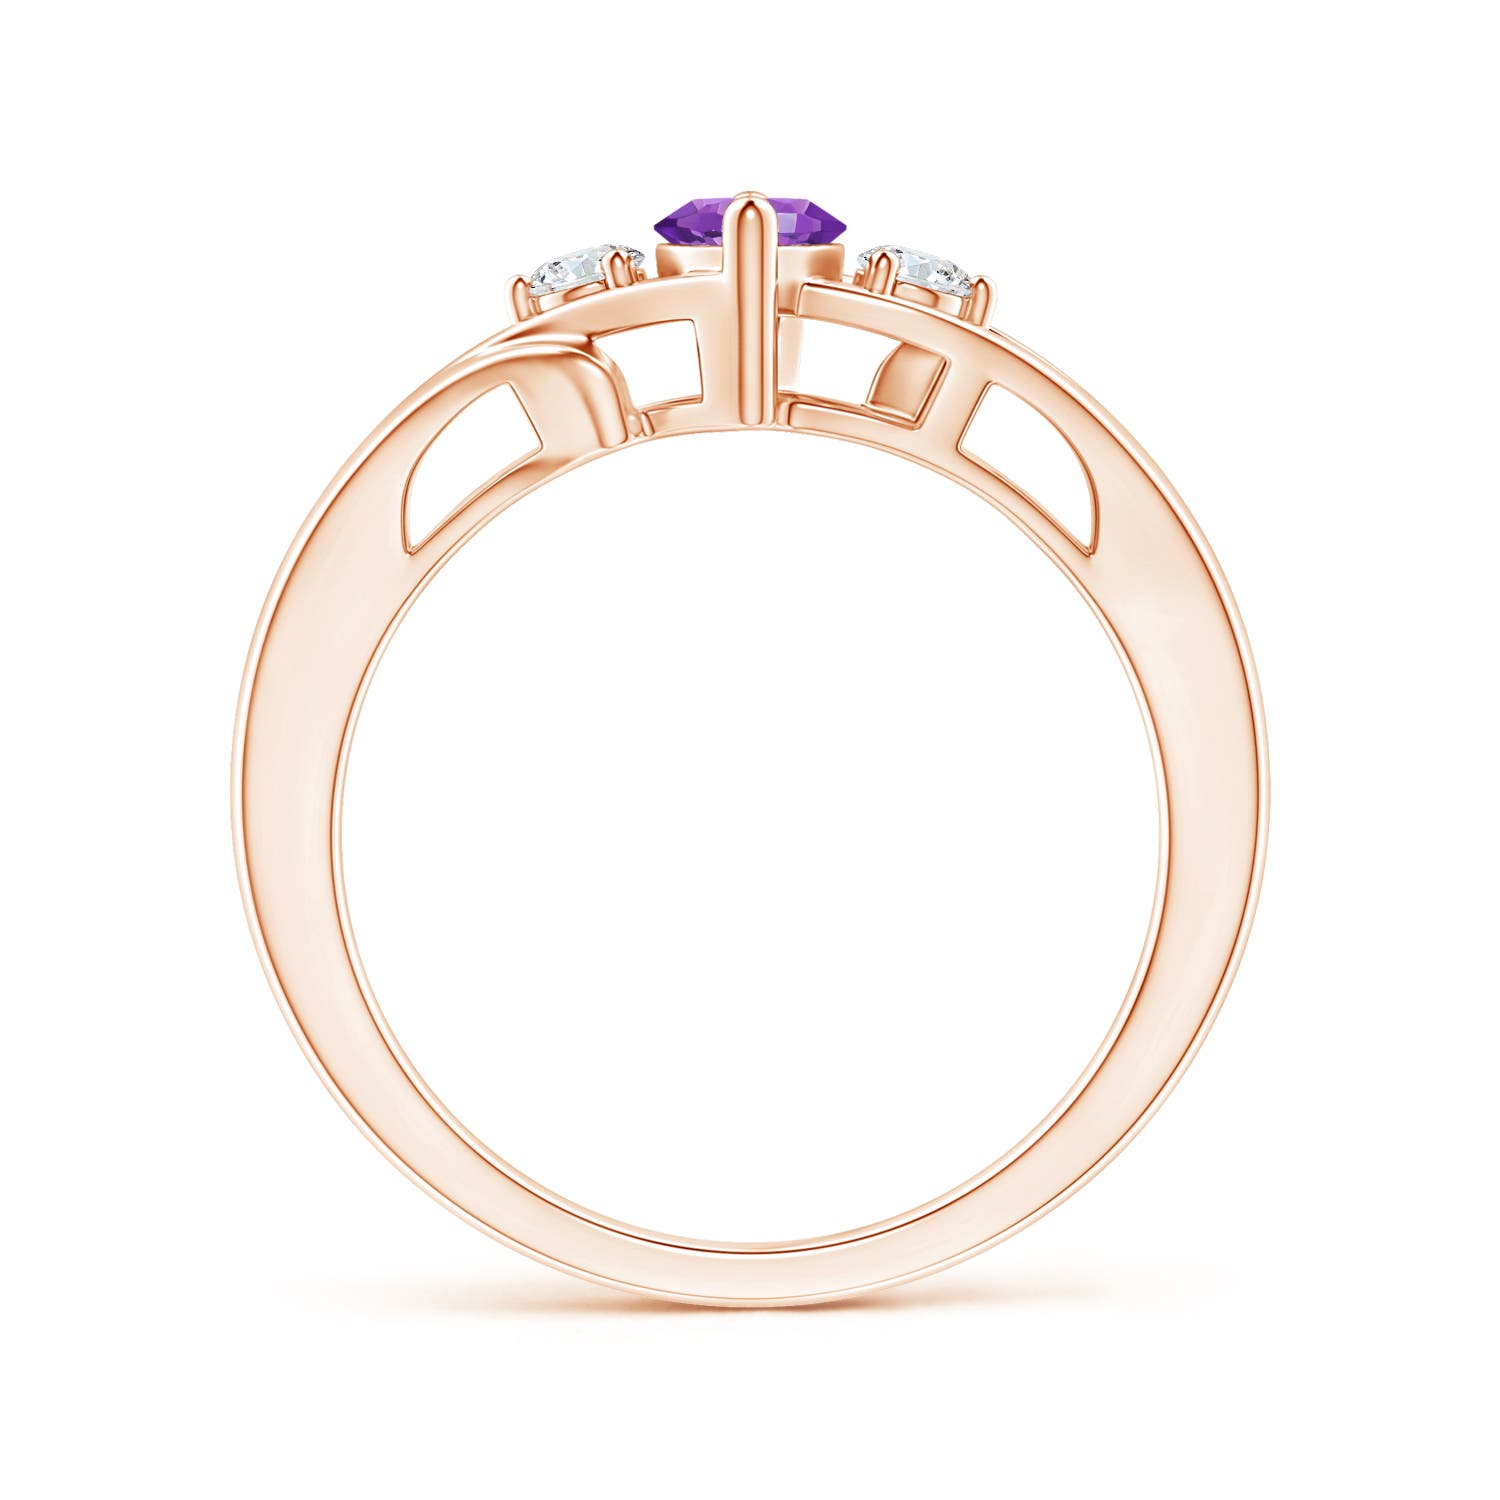 AAA - Amethyst / 0.64 CT / 14 KT Rose Gold